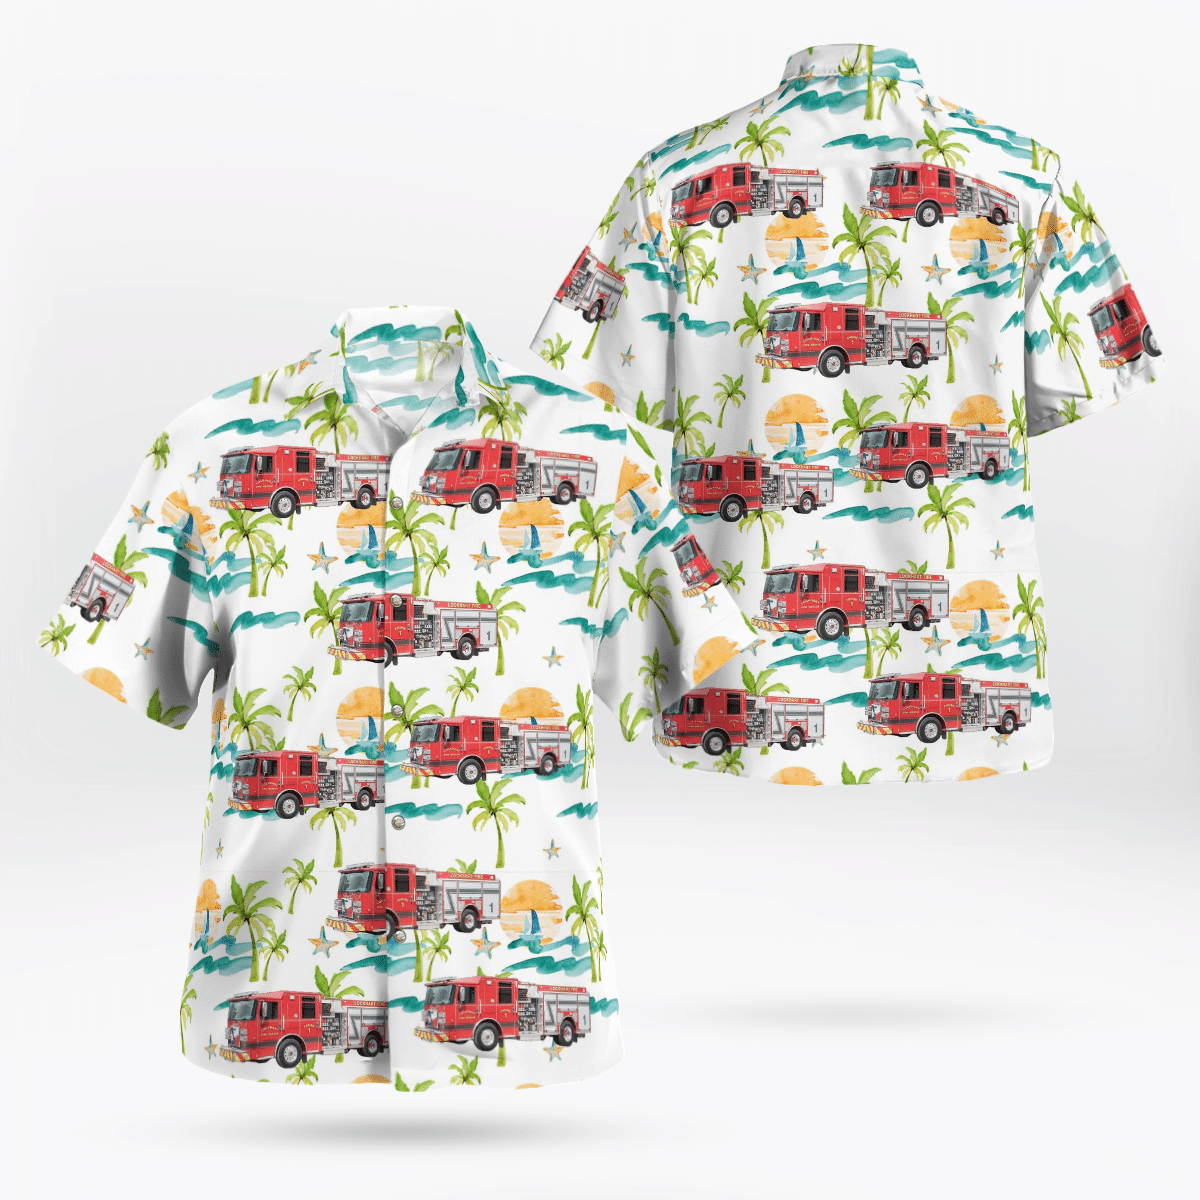 Shop now to find the perfect Hawaii Shirt for your hobby 64